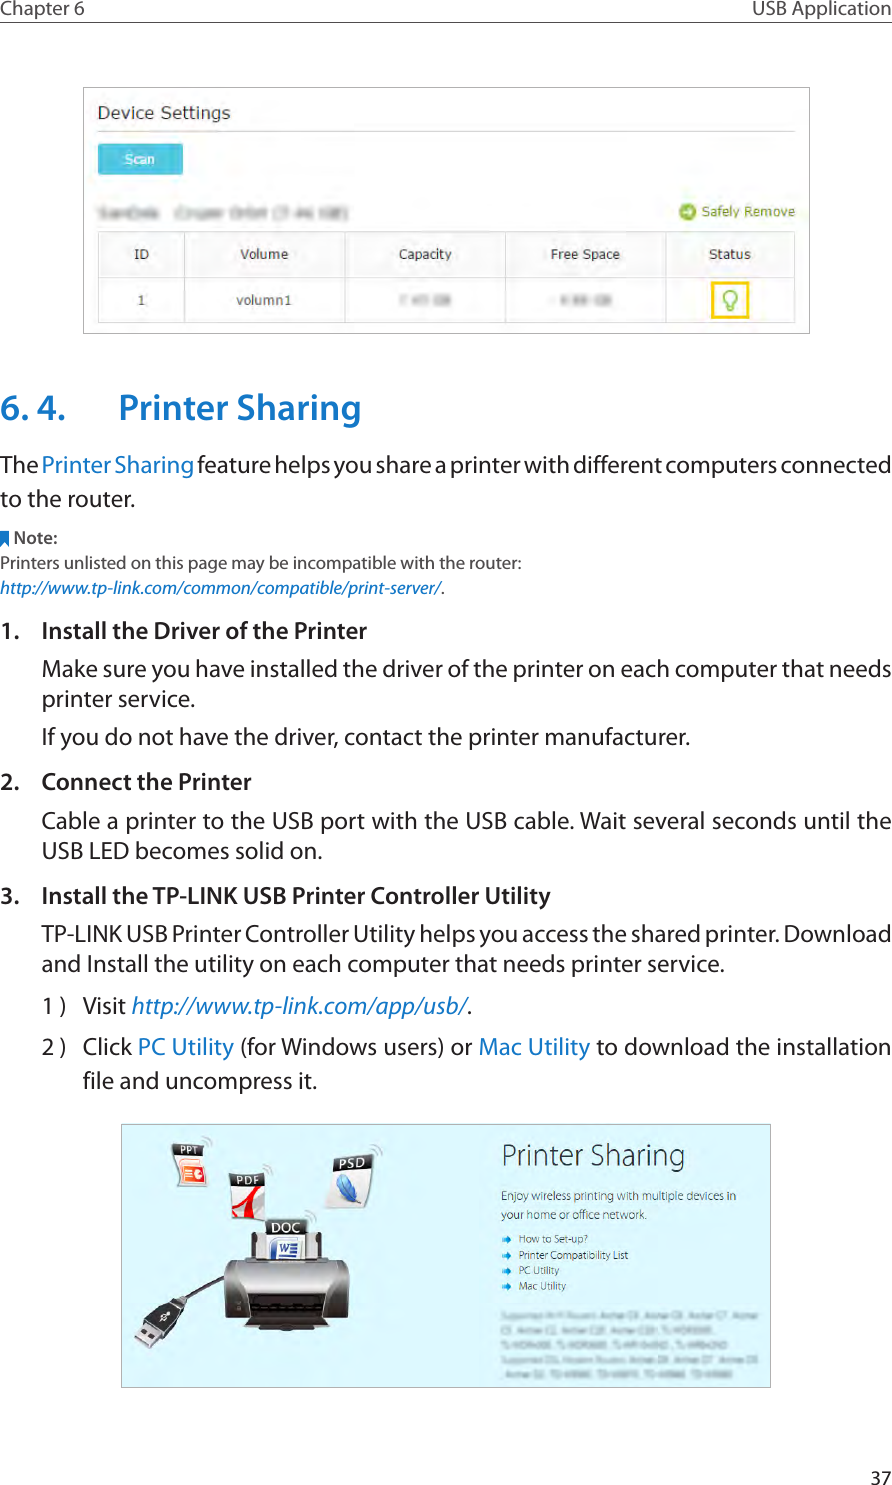 37Chapter 6 USB Application6. 4.  Printer SharingThe Printer Sharing feature helps you share a printer with different computers connected to the router.Note:Printers unlisted on this page may be incompatible with the router: http://www.tp-link.com/common/compatible/print-server/.1.  Install the Driver of the PrinterMake sure you have installed the driver of the printer on each computer that needs printer service.If you do not have the driver, contact the printer manufacturer.2.  Connect the PrinterCable a printer to the USB port with the USB cable. Wait several seconds until the USB LED becomes solid on.3.  Install the TP-LINK USB Printer Controller UtilityTP-LINK USB Printer Controller Utility helps you access the shared printer. Download and Install the utility on each computer that needs printer service.1 )  Visit http://www.tp-link.com/app/usb/.2 )  Click PC Utility (for Windows users) or Mac Utility to download the installation file and uncompress it.